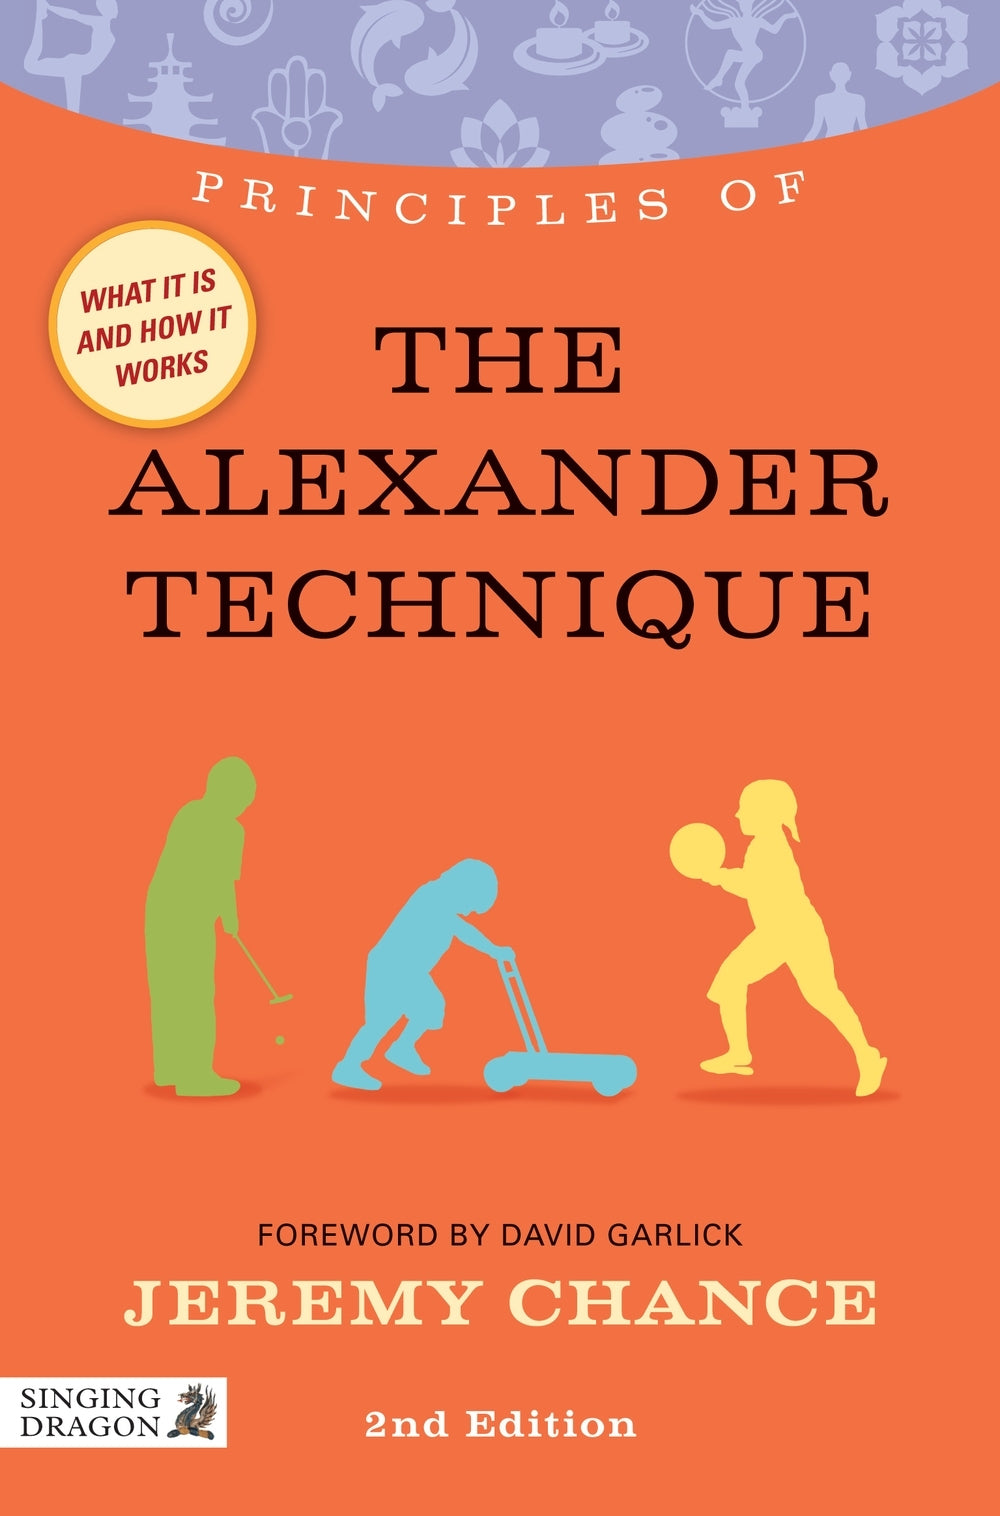 Principles of the Alexander Technique by Jeremy Chance